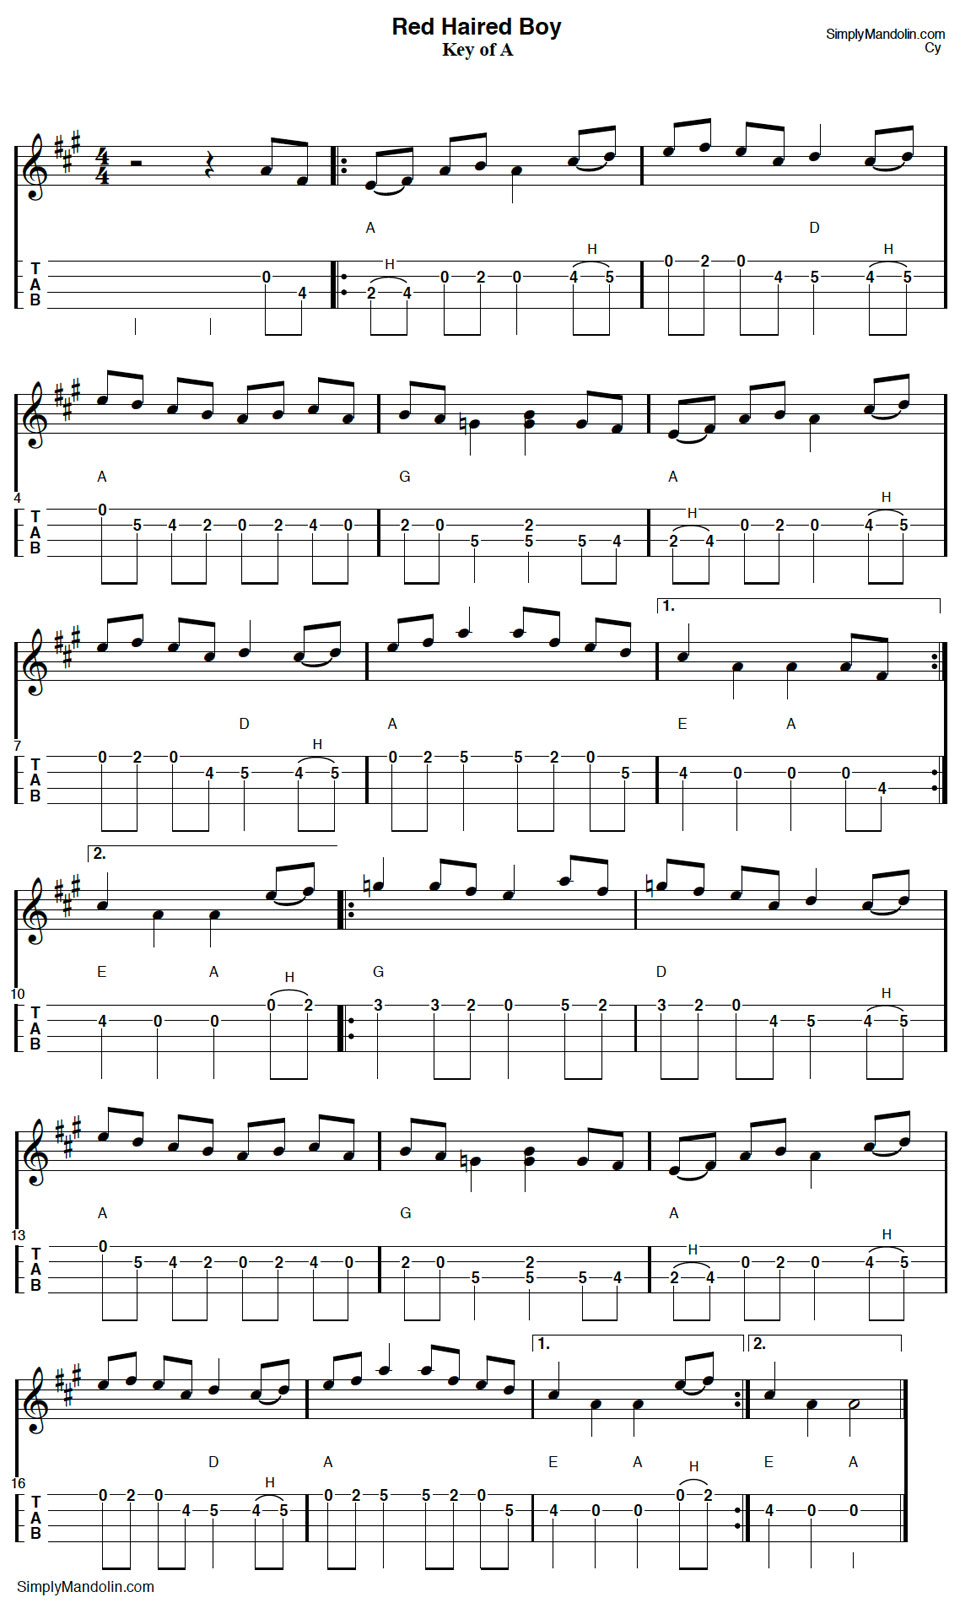 Mandolin tab for The Red Haired Boy